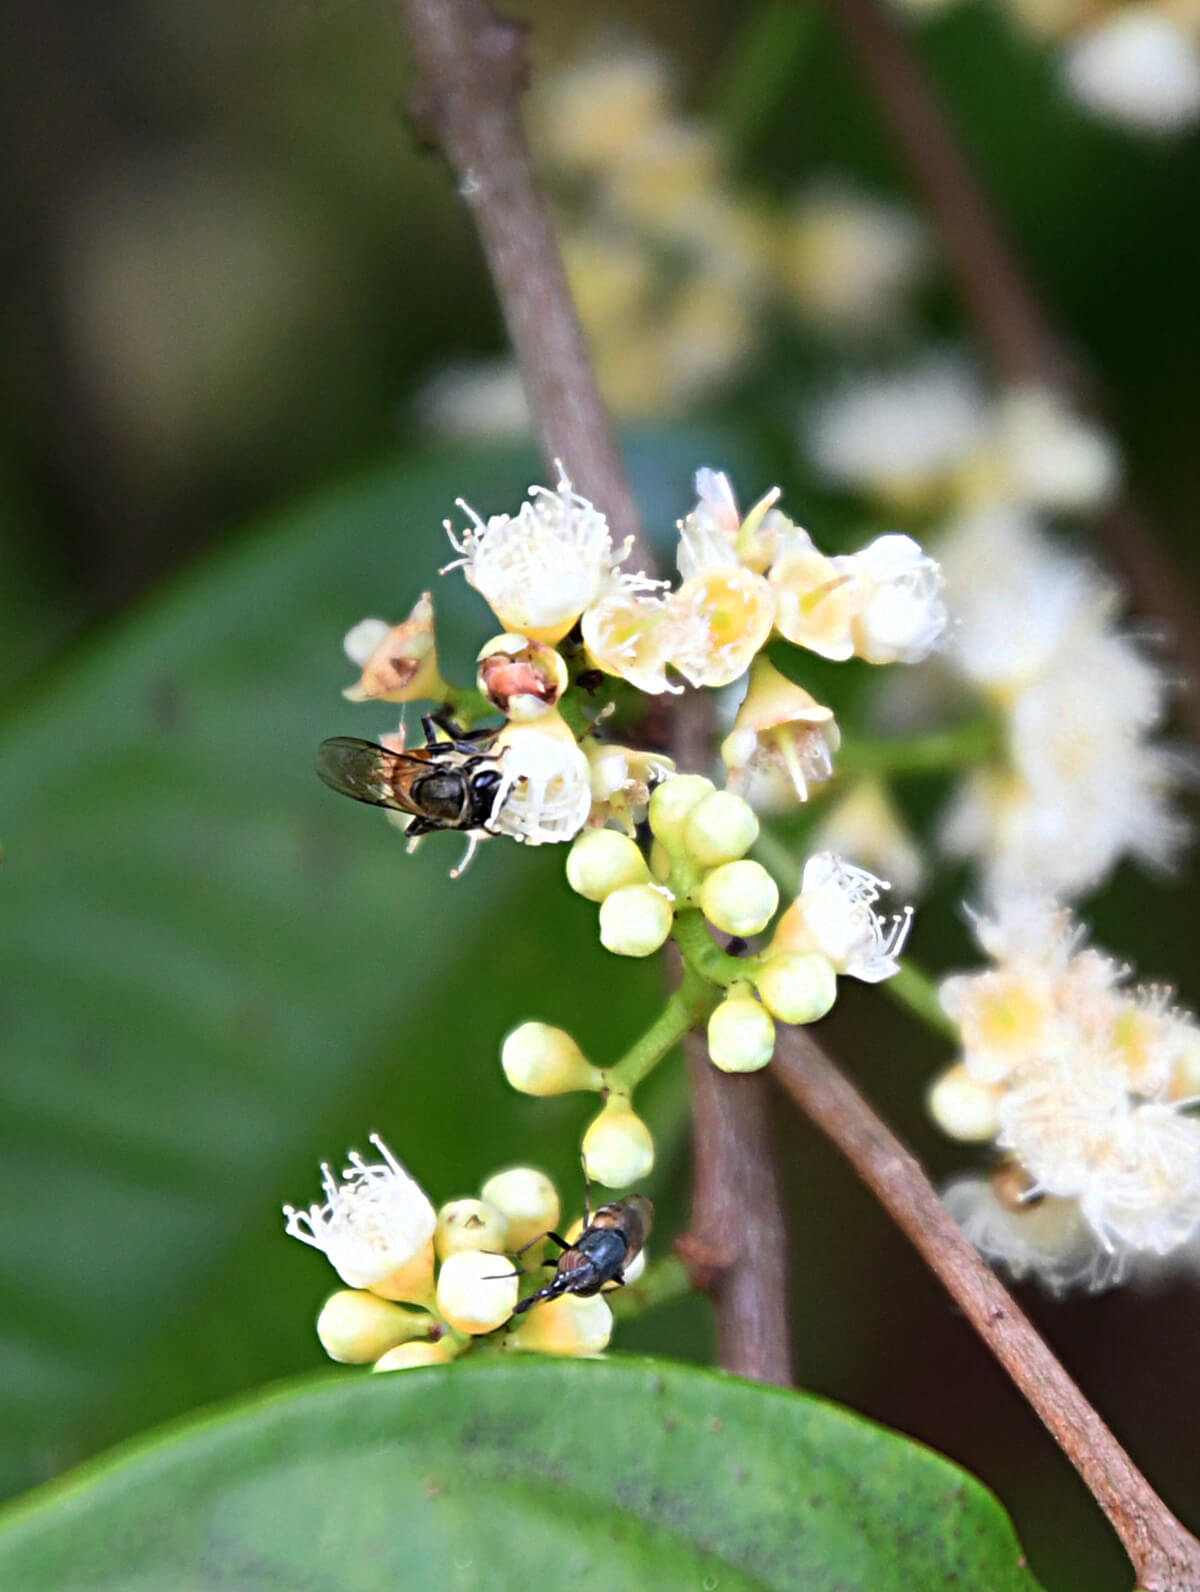 Stingless bees were introduced to Horizon Hills.